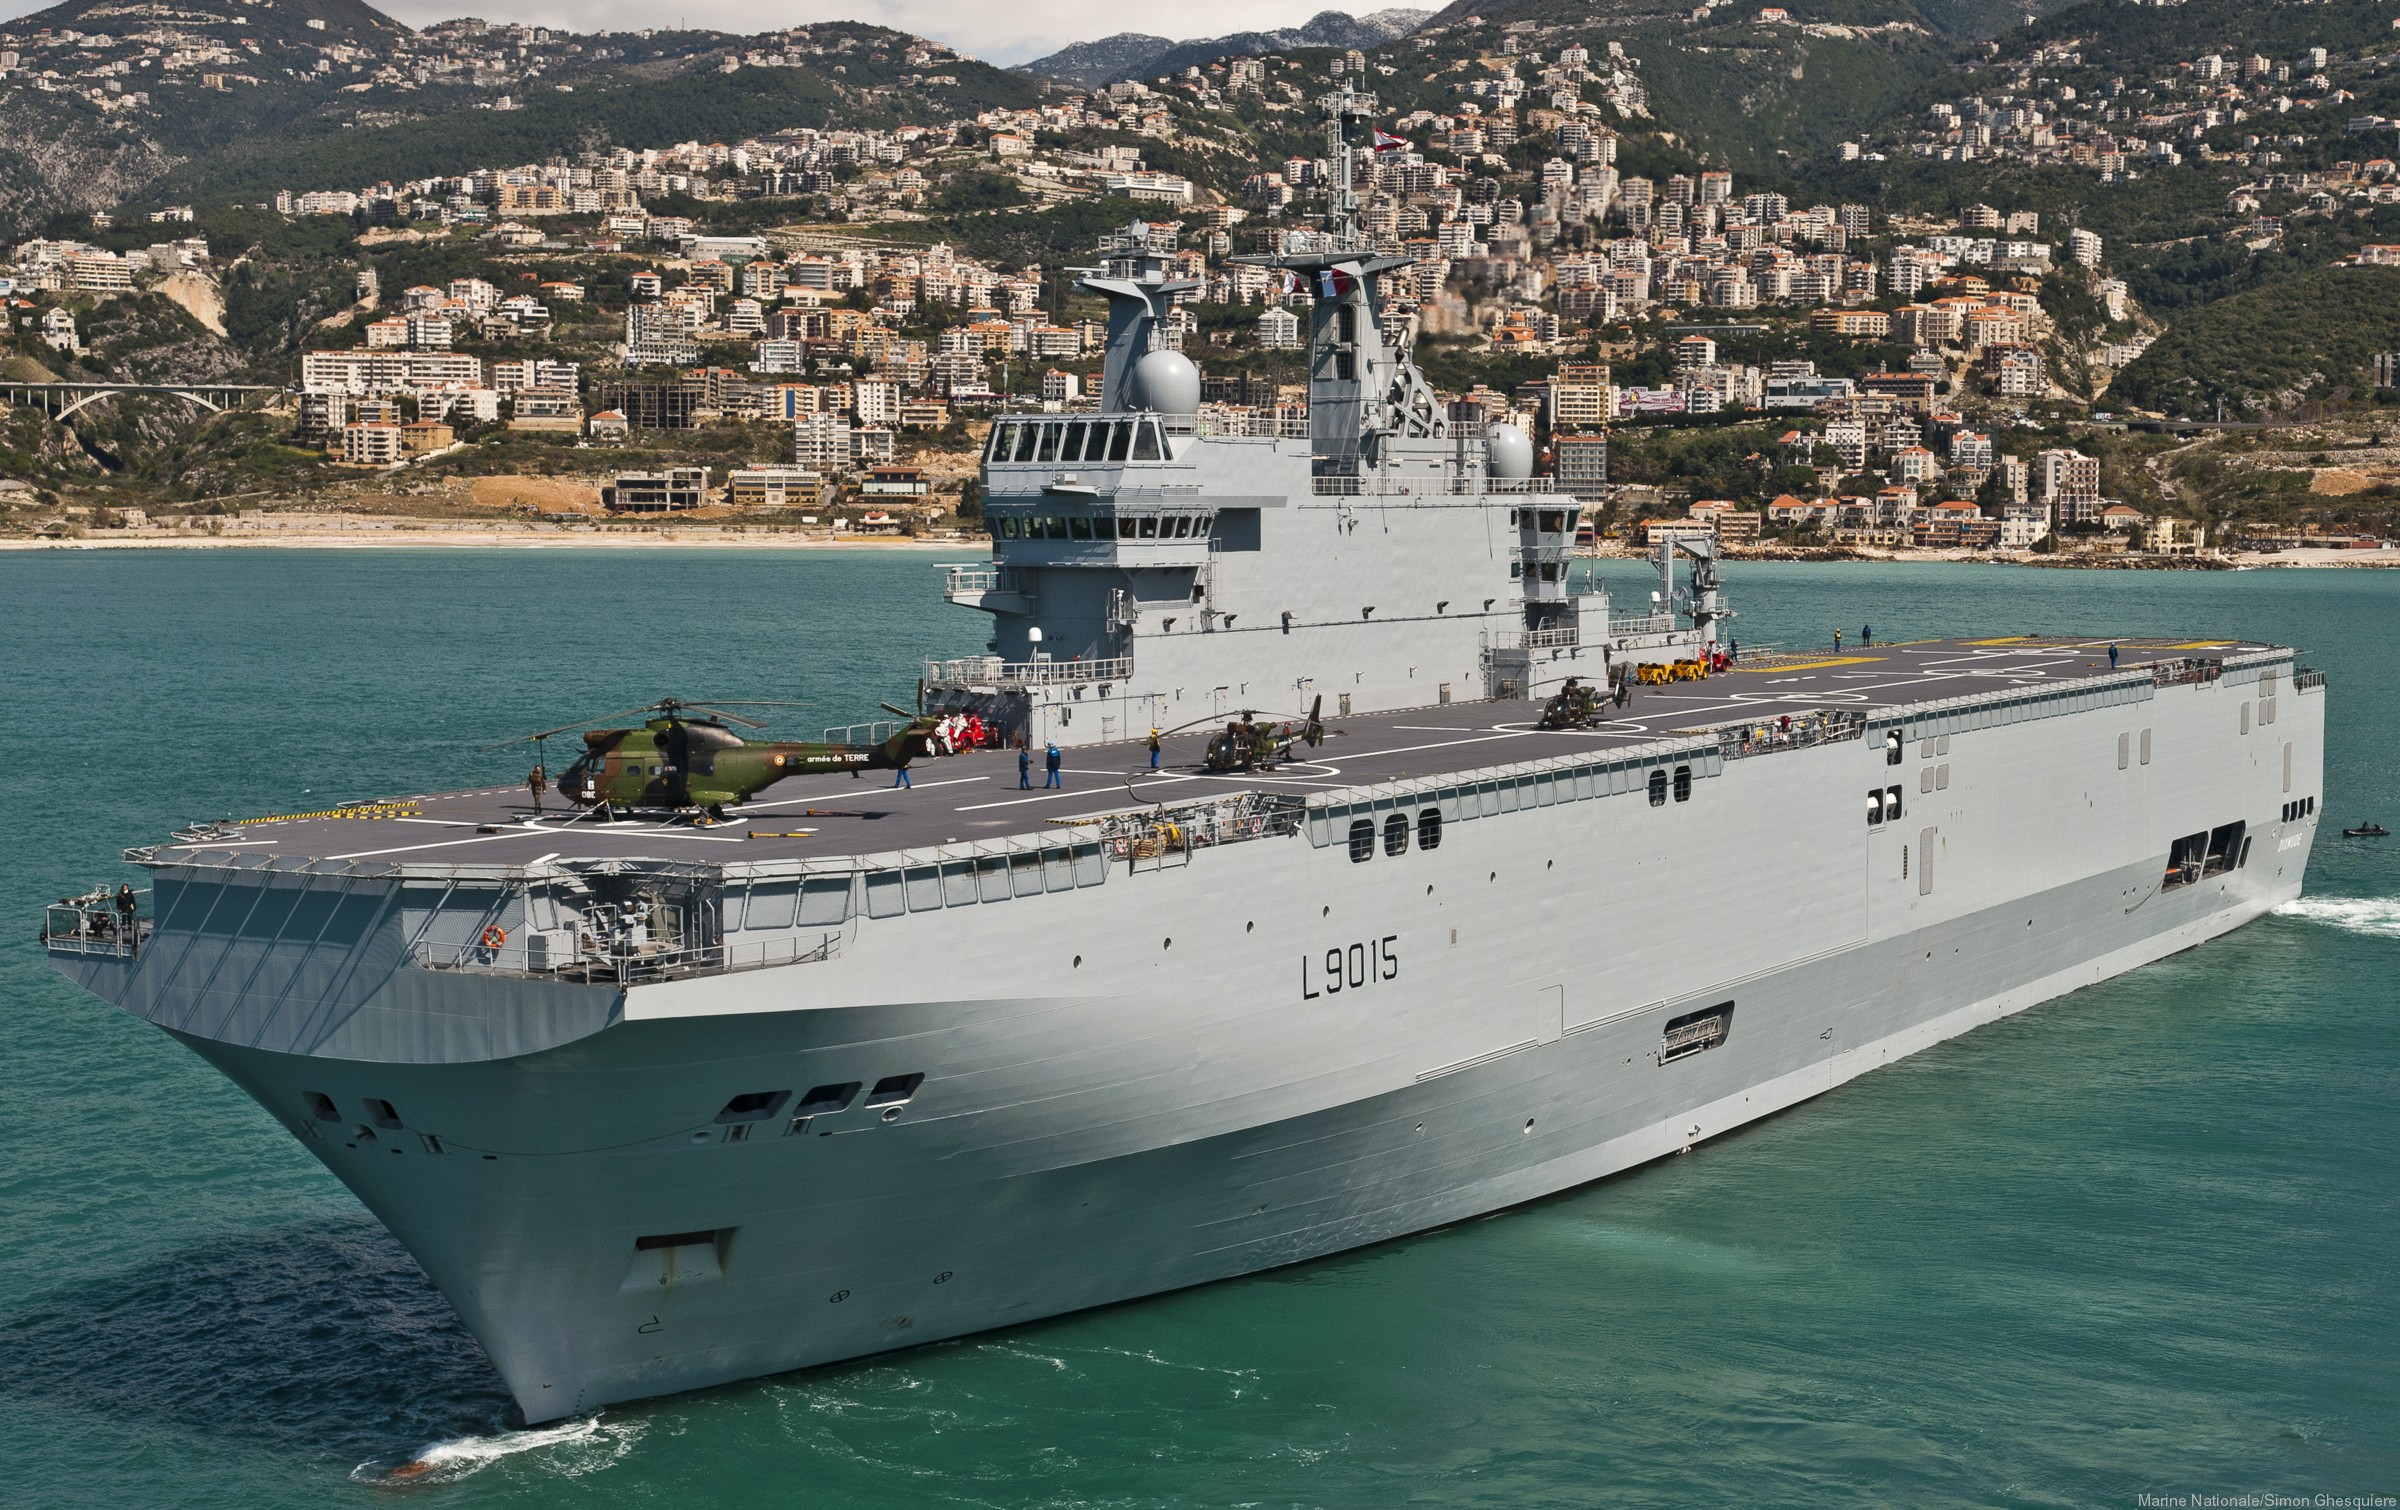 l-9015 fs dixmude mistral class amphibious assault command ship bpc french navy marine nationale 02